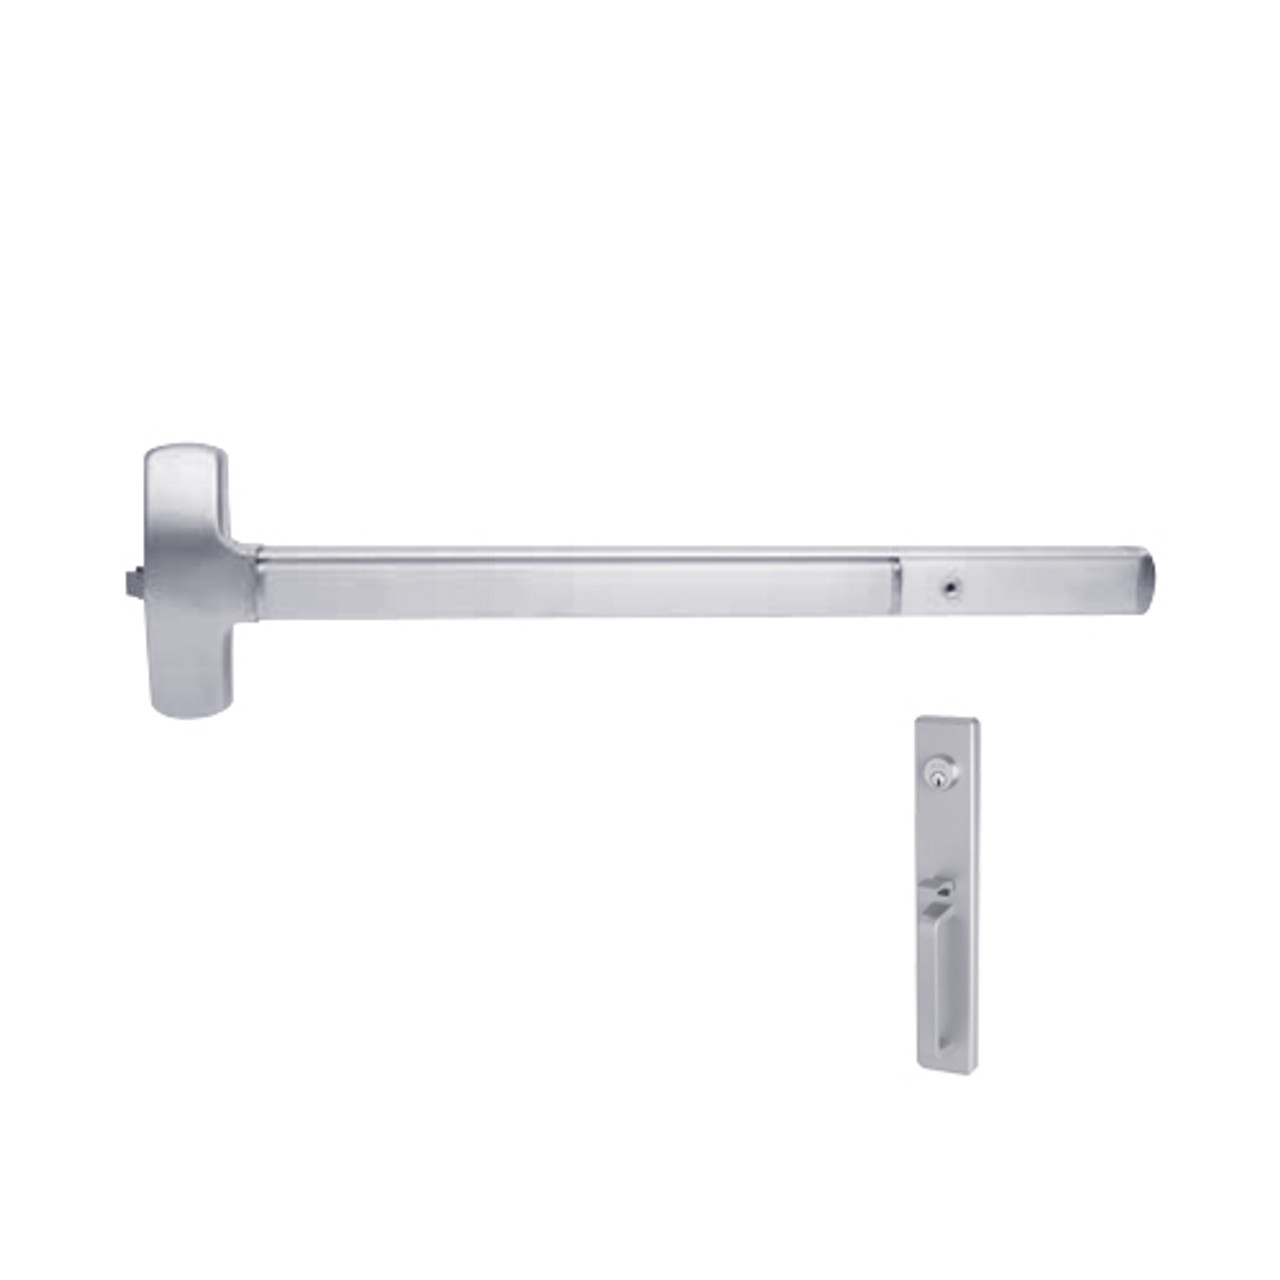 25-R-TP-US26-4 Falcon Exit Device in Polished Chrome